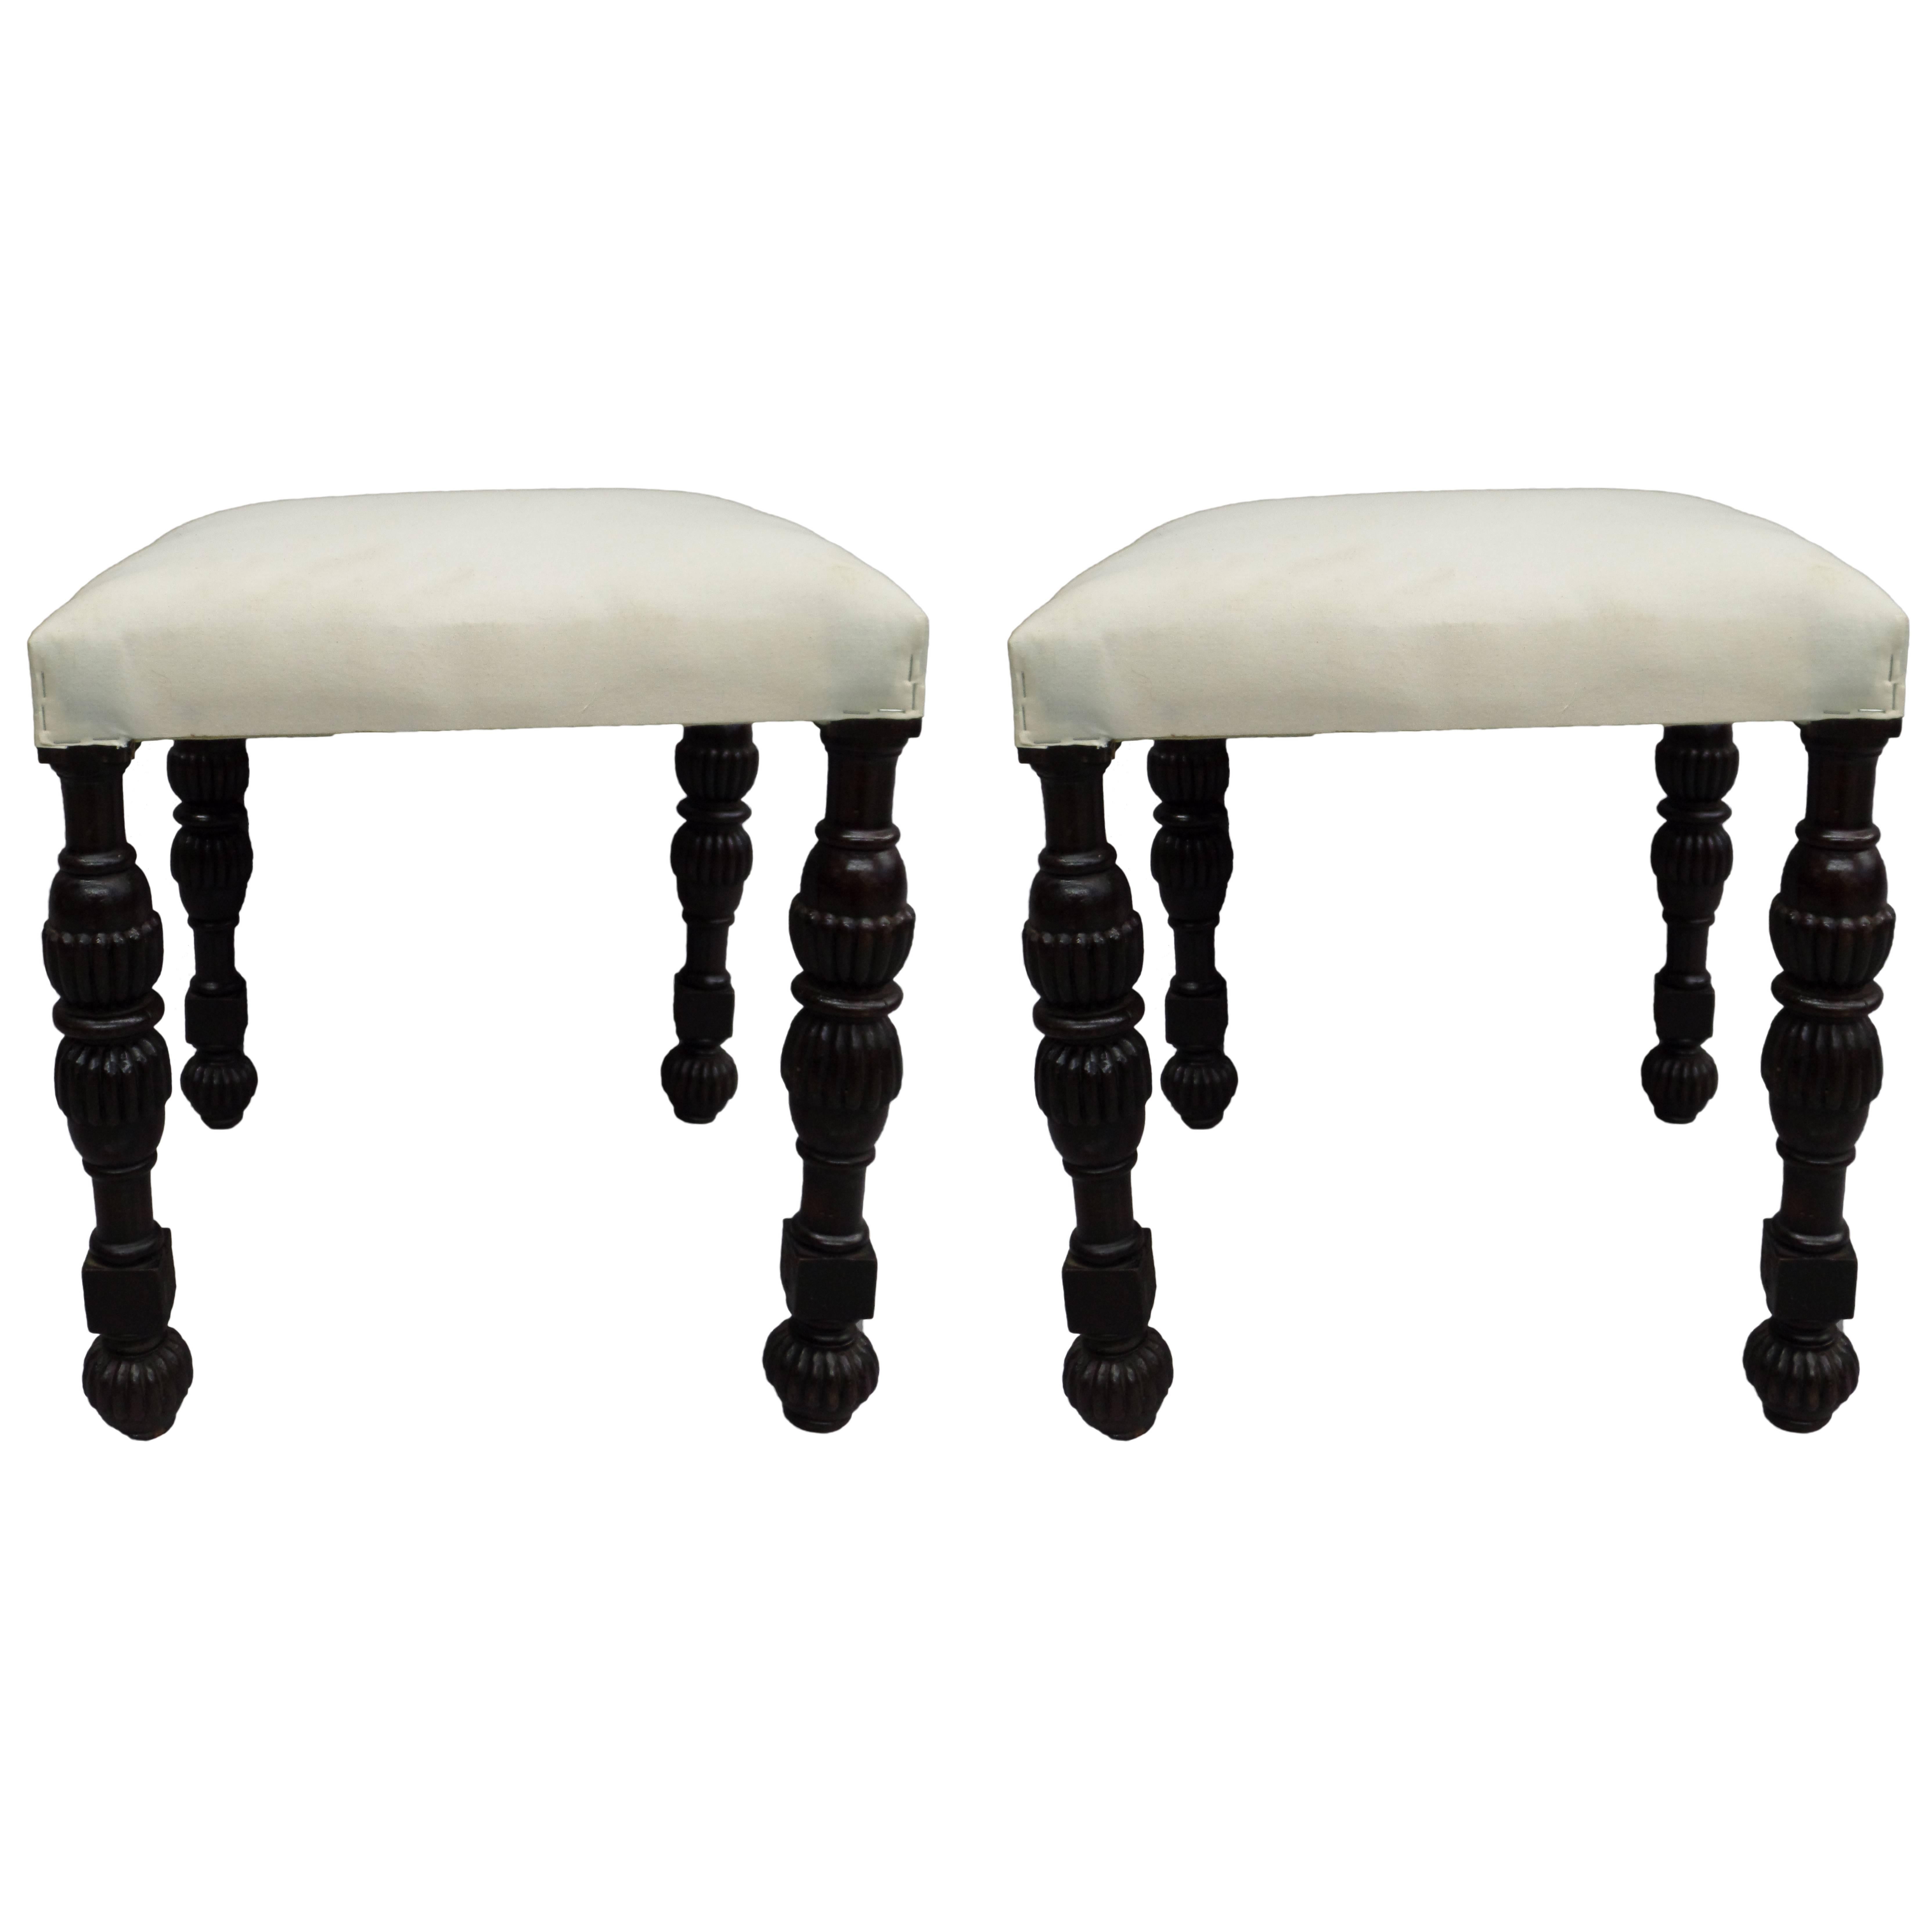 Pair of Italian Midcentury Carved and Turned Wood Stools or Benches, Italy, 1930 For Sale